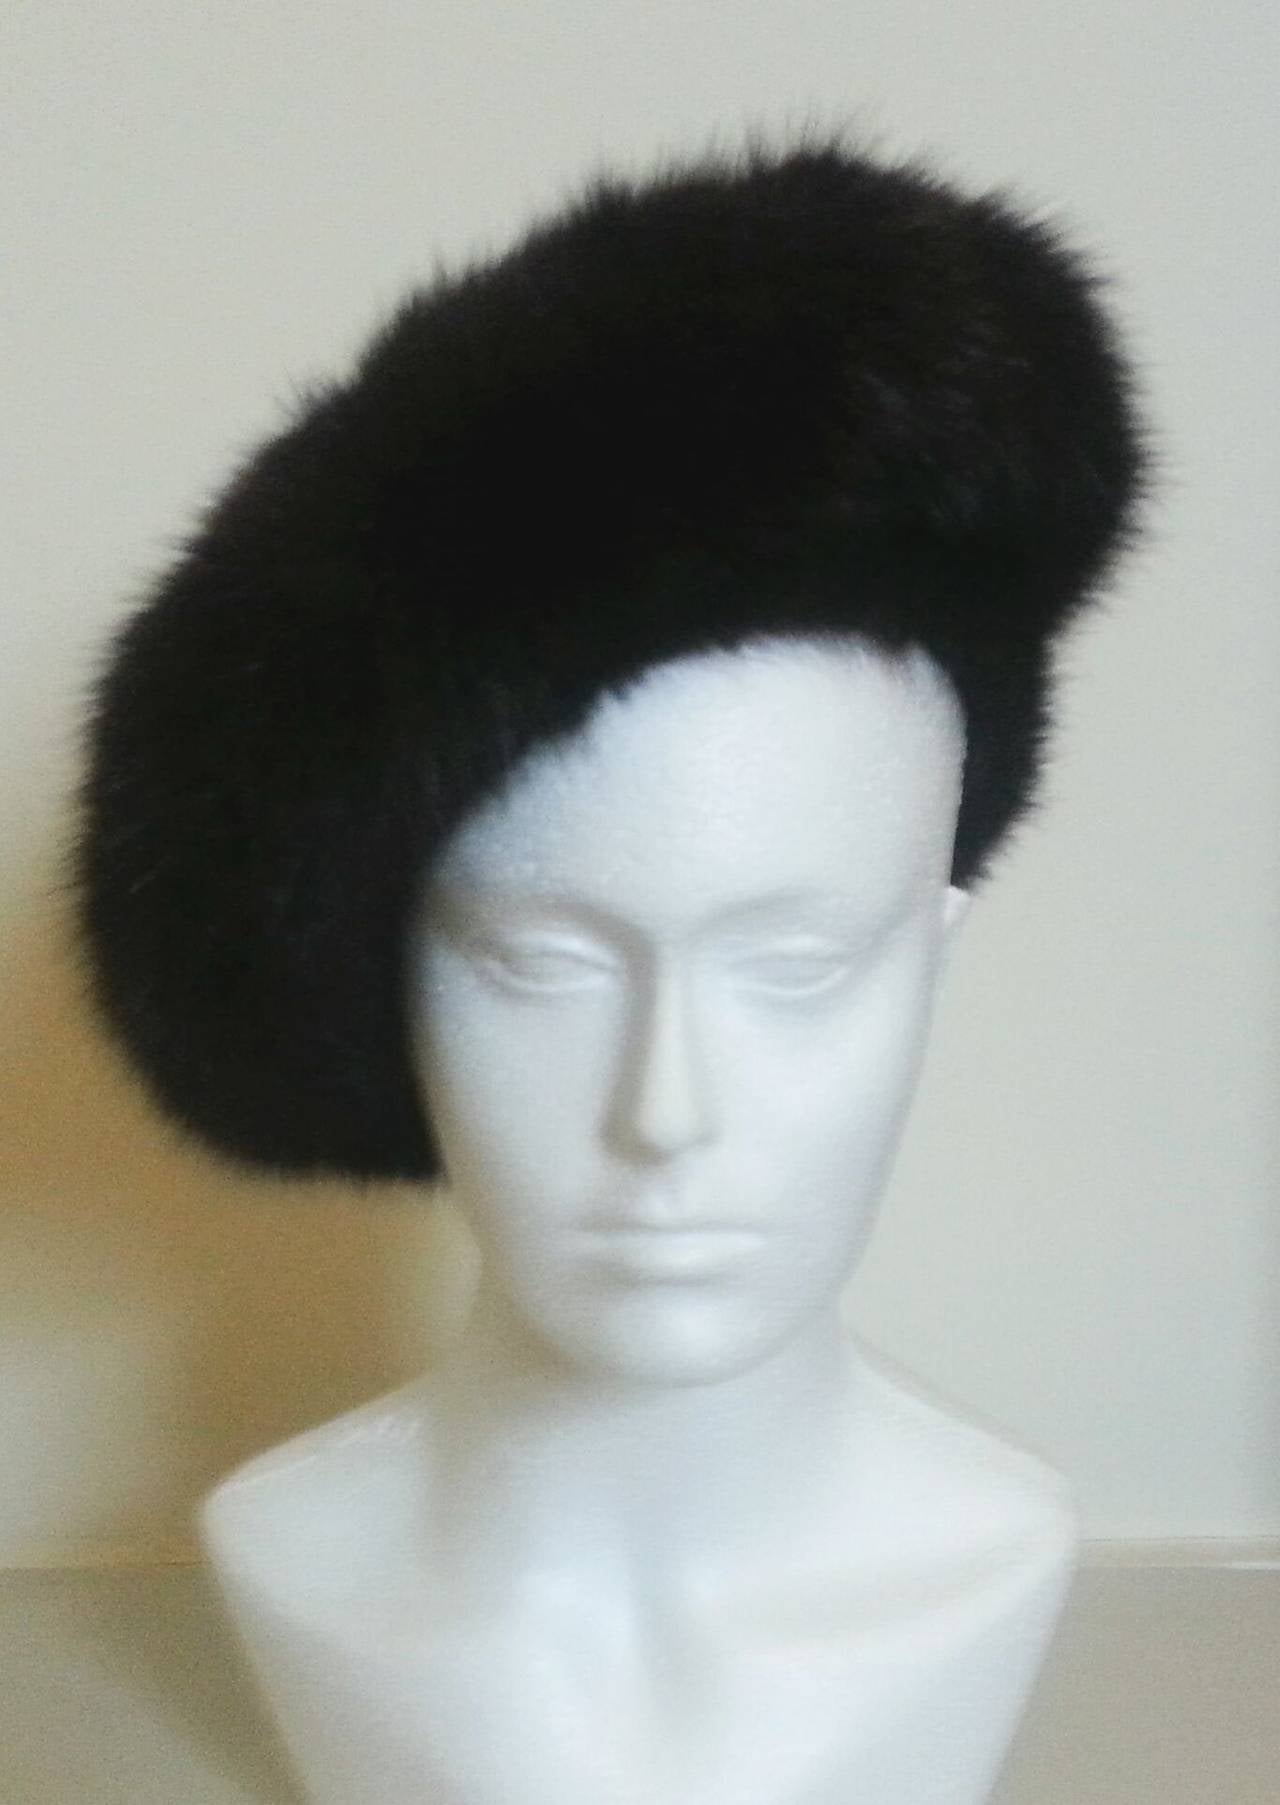 This is a very rare Chanel couture dark brown mink beret hat from Karl Largerfeld's first Autumn Winter Collection for the House of Chanel in 1984. 

The mink is extremely high quality with no shedding or patches. The detachable bow is made from